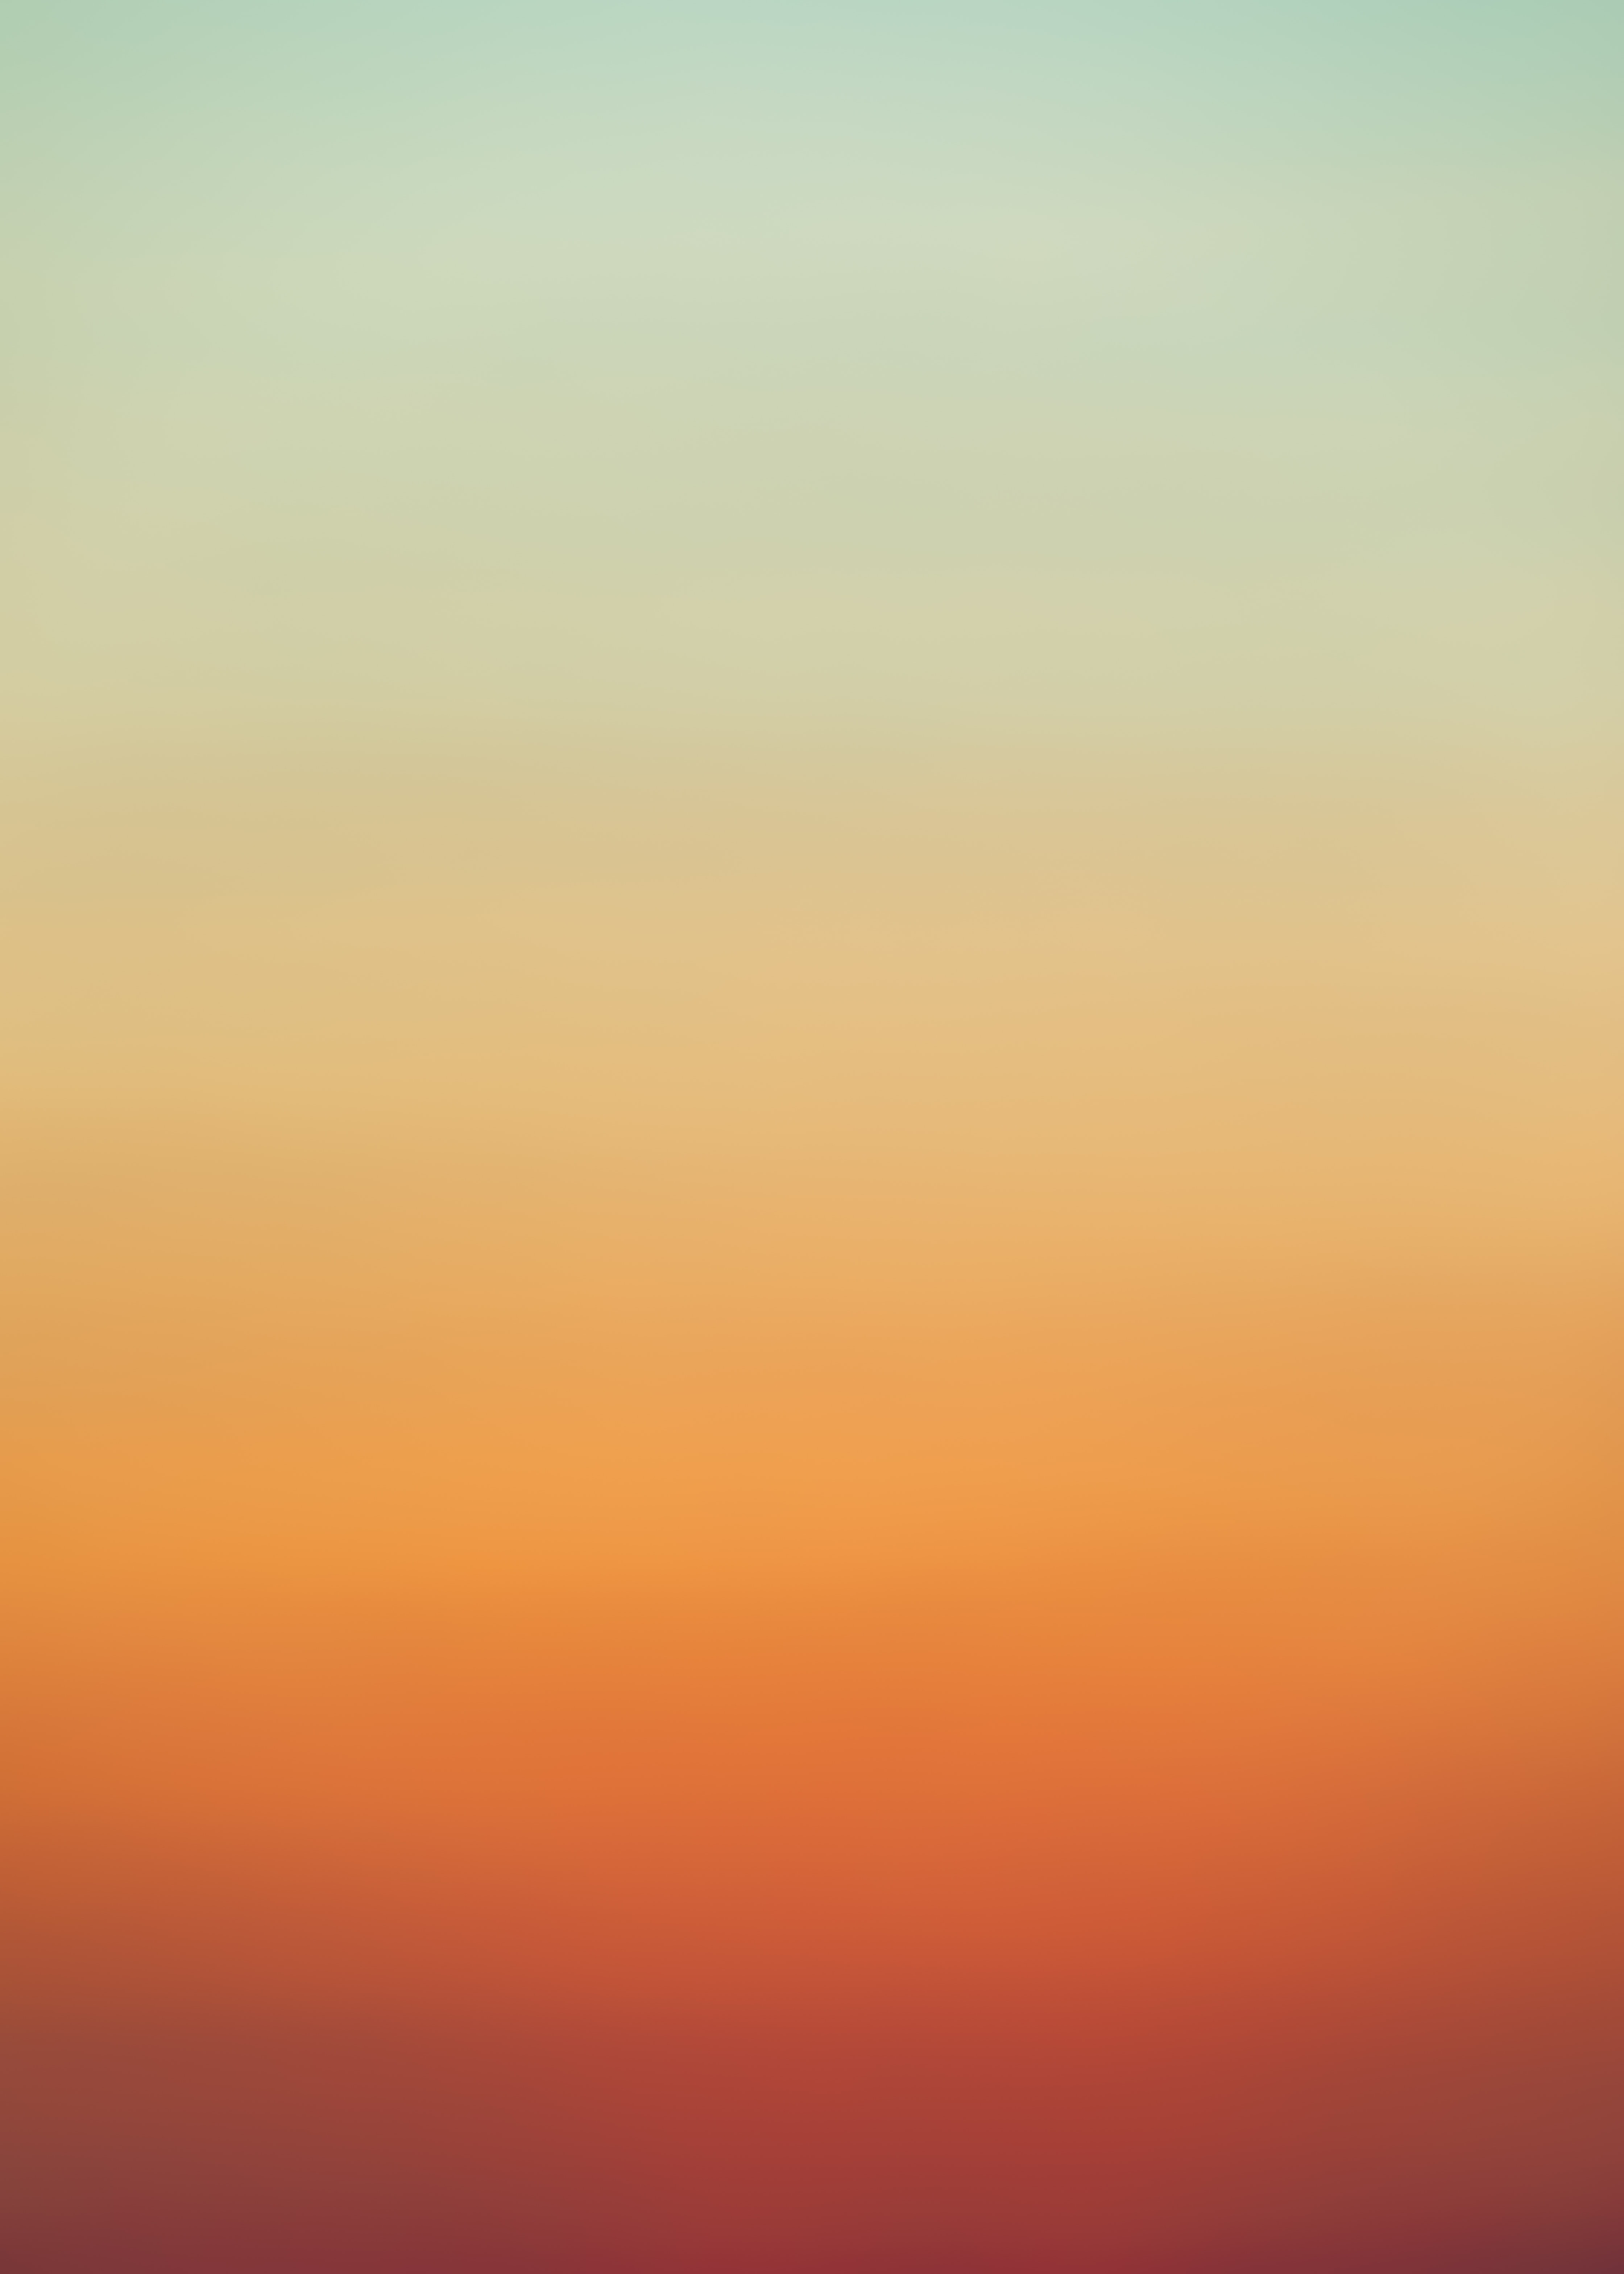 122464 Screensavers and Wallpapers Gradient for phone. Download gradient, abstract, background, yellow, orange, color pictures for free